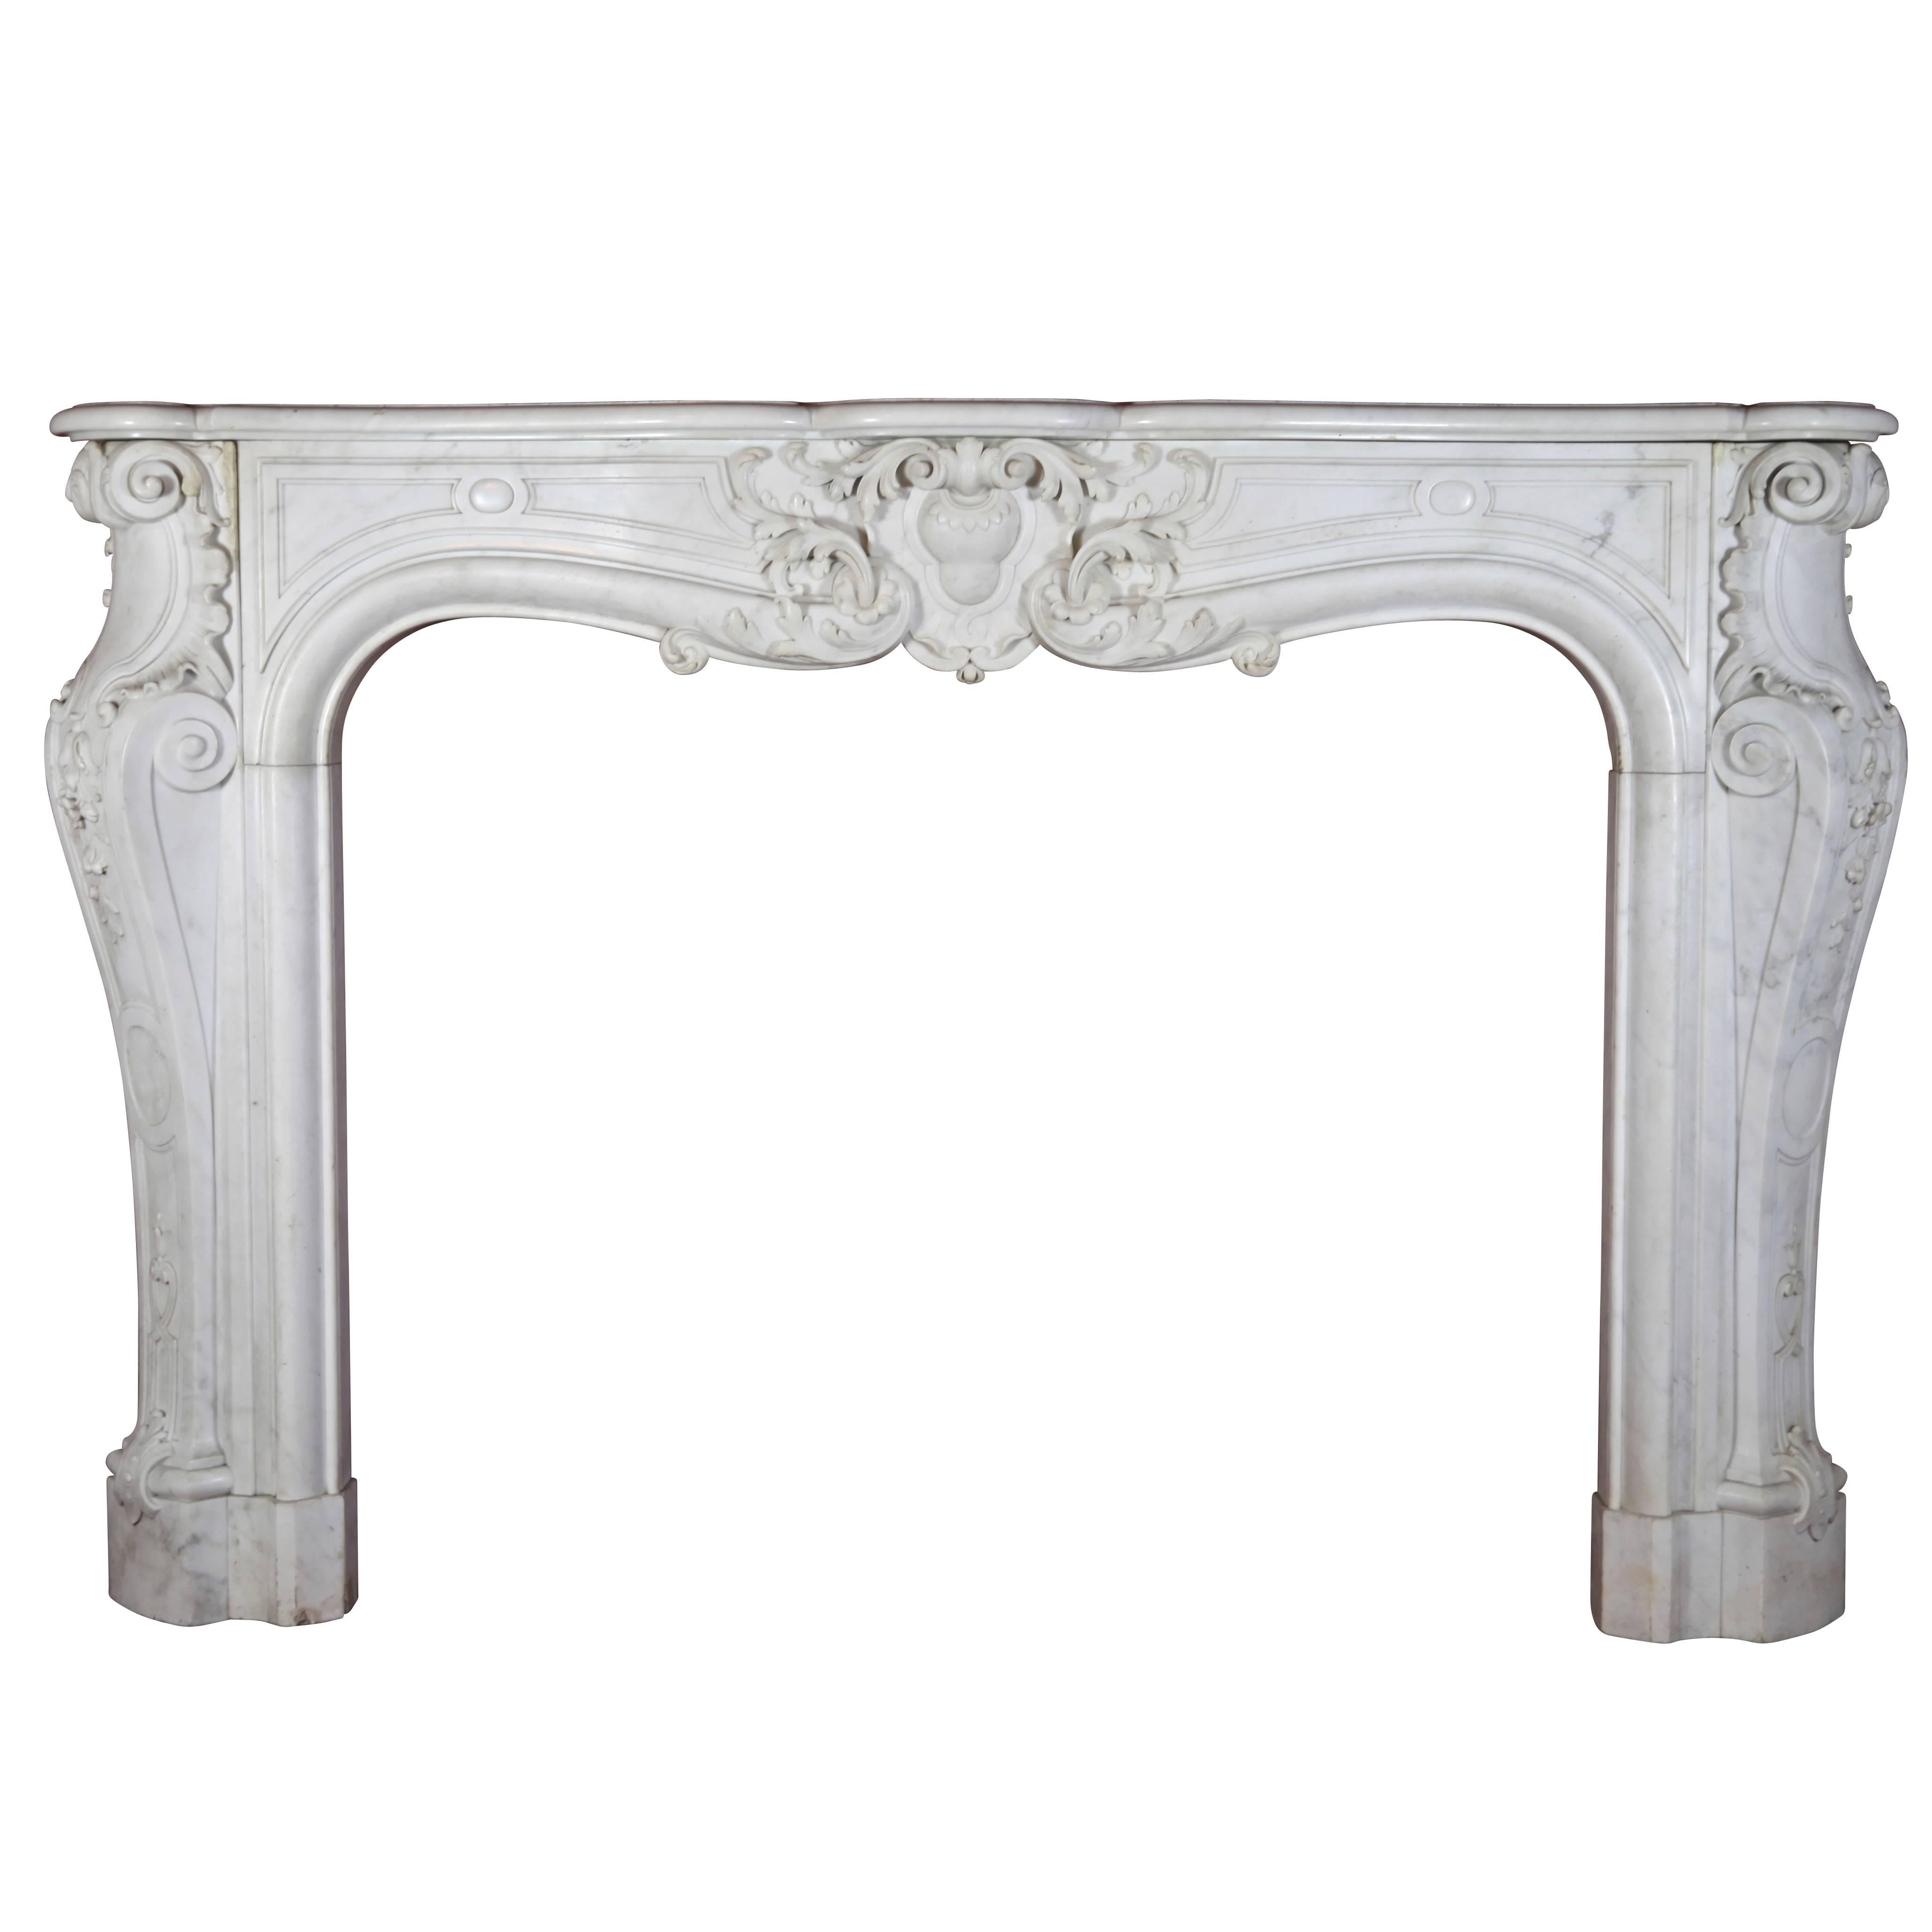 Grand White Statuary Marble Antique Fireplace Surround